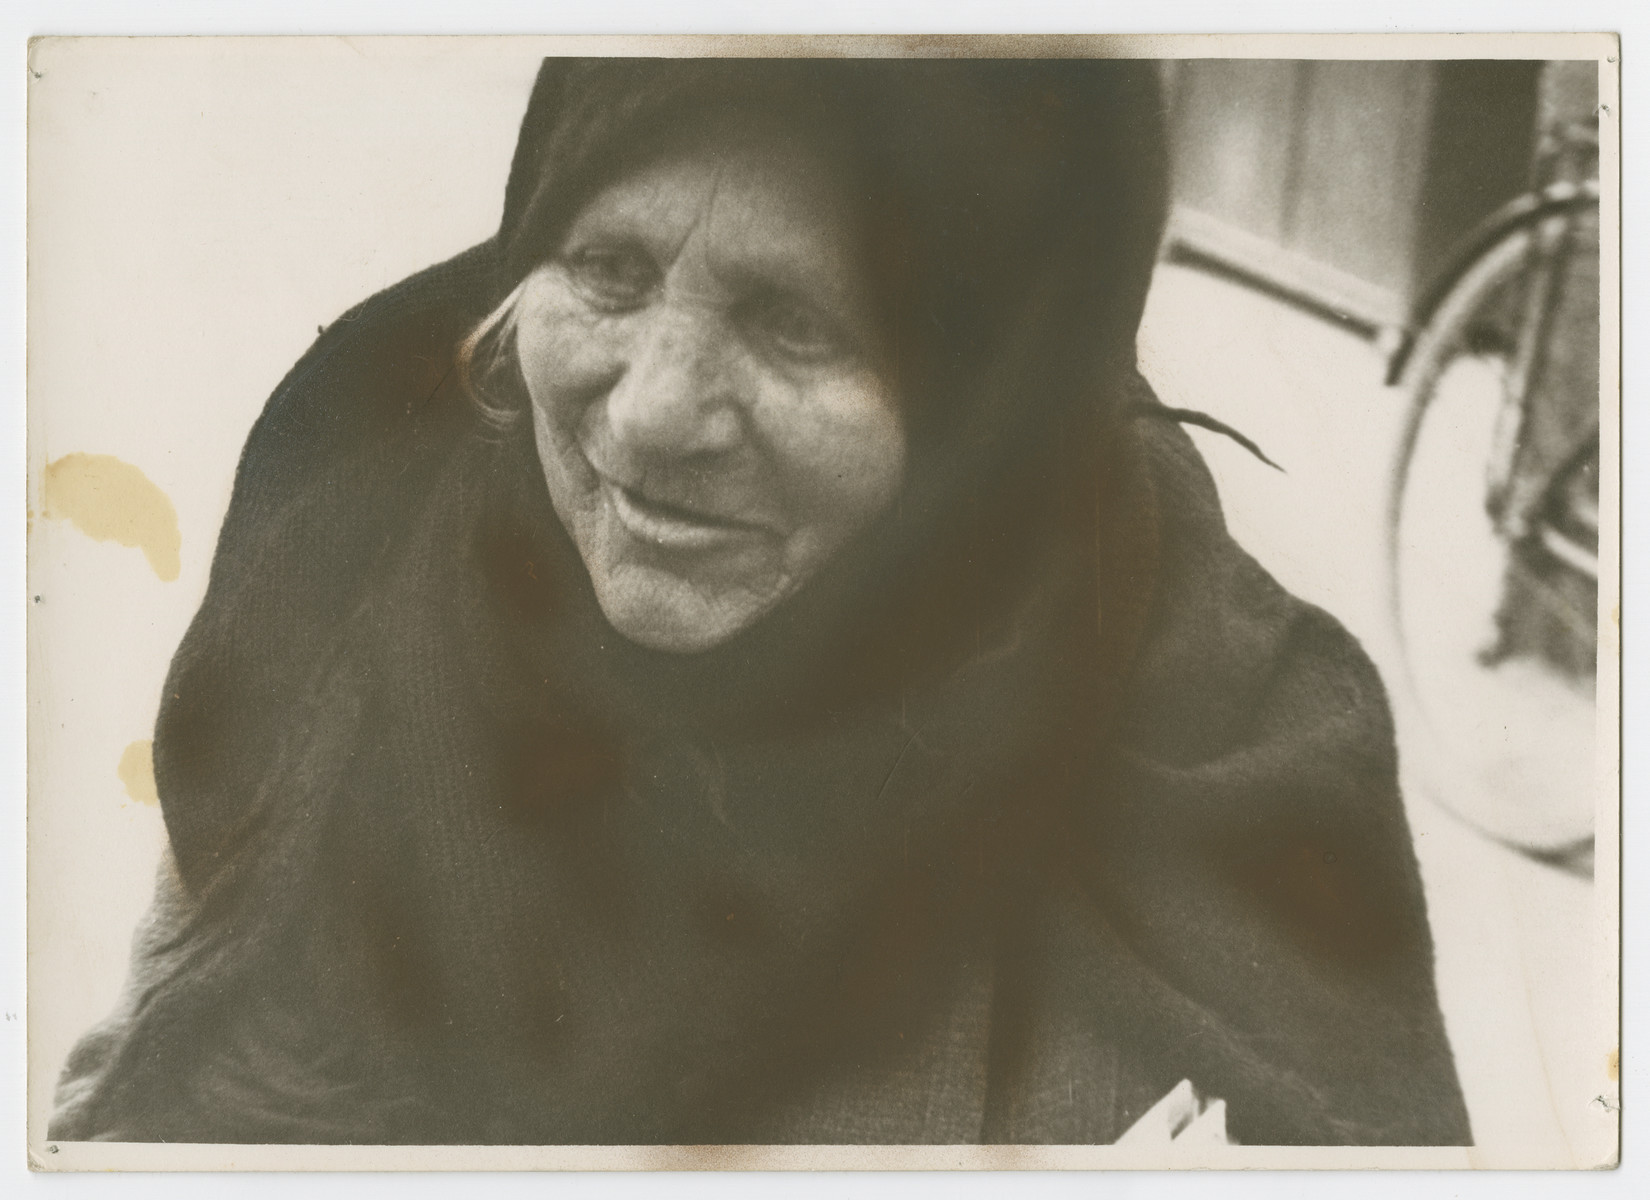 Close-up portrait of a woman [probably in Tel Aviv]

Photograph is used on page 180 of Robert Gessner's "Some of My Best Friends are Jews."